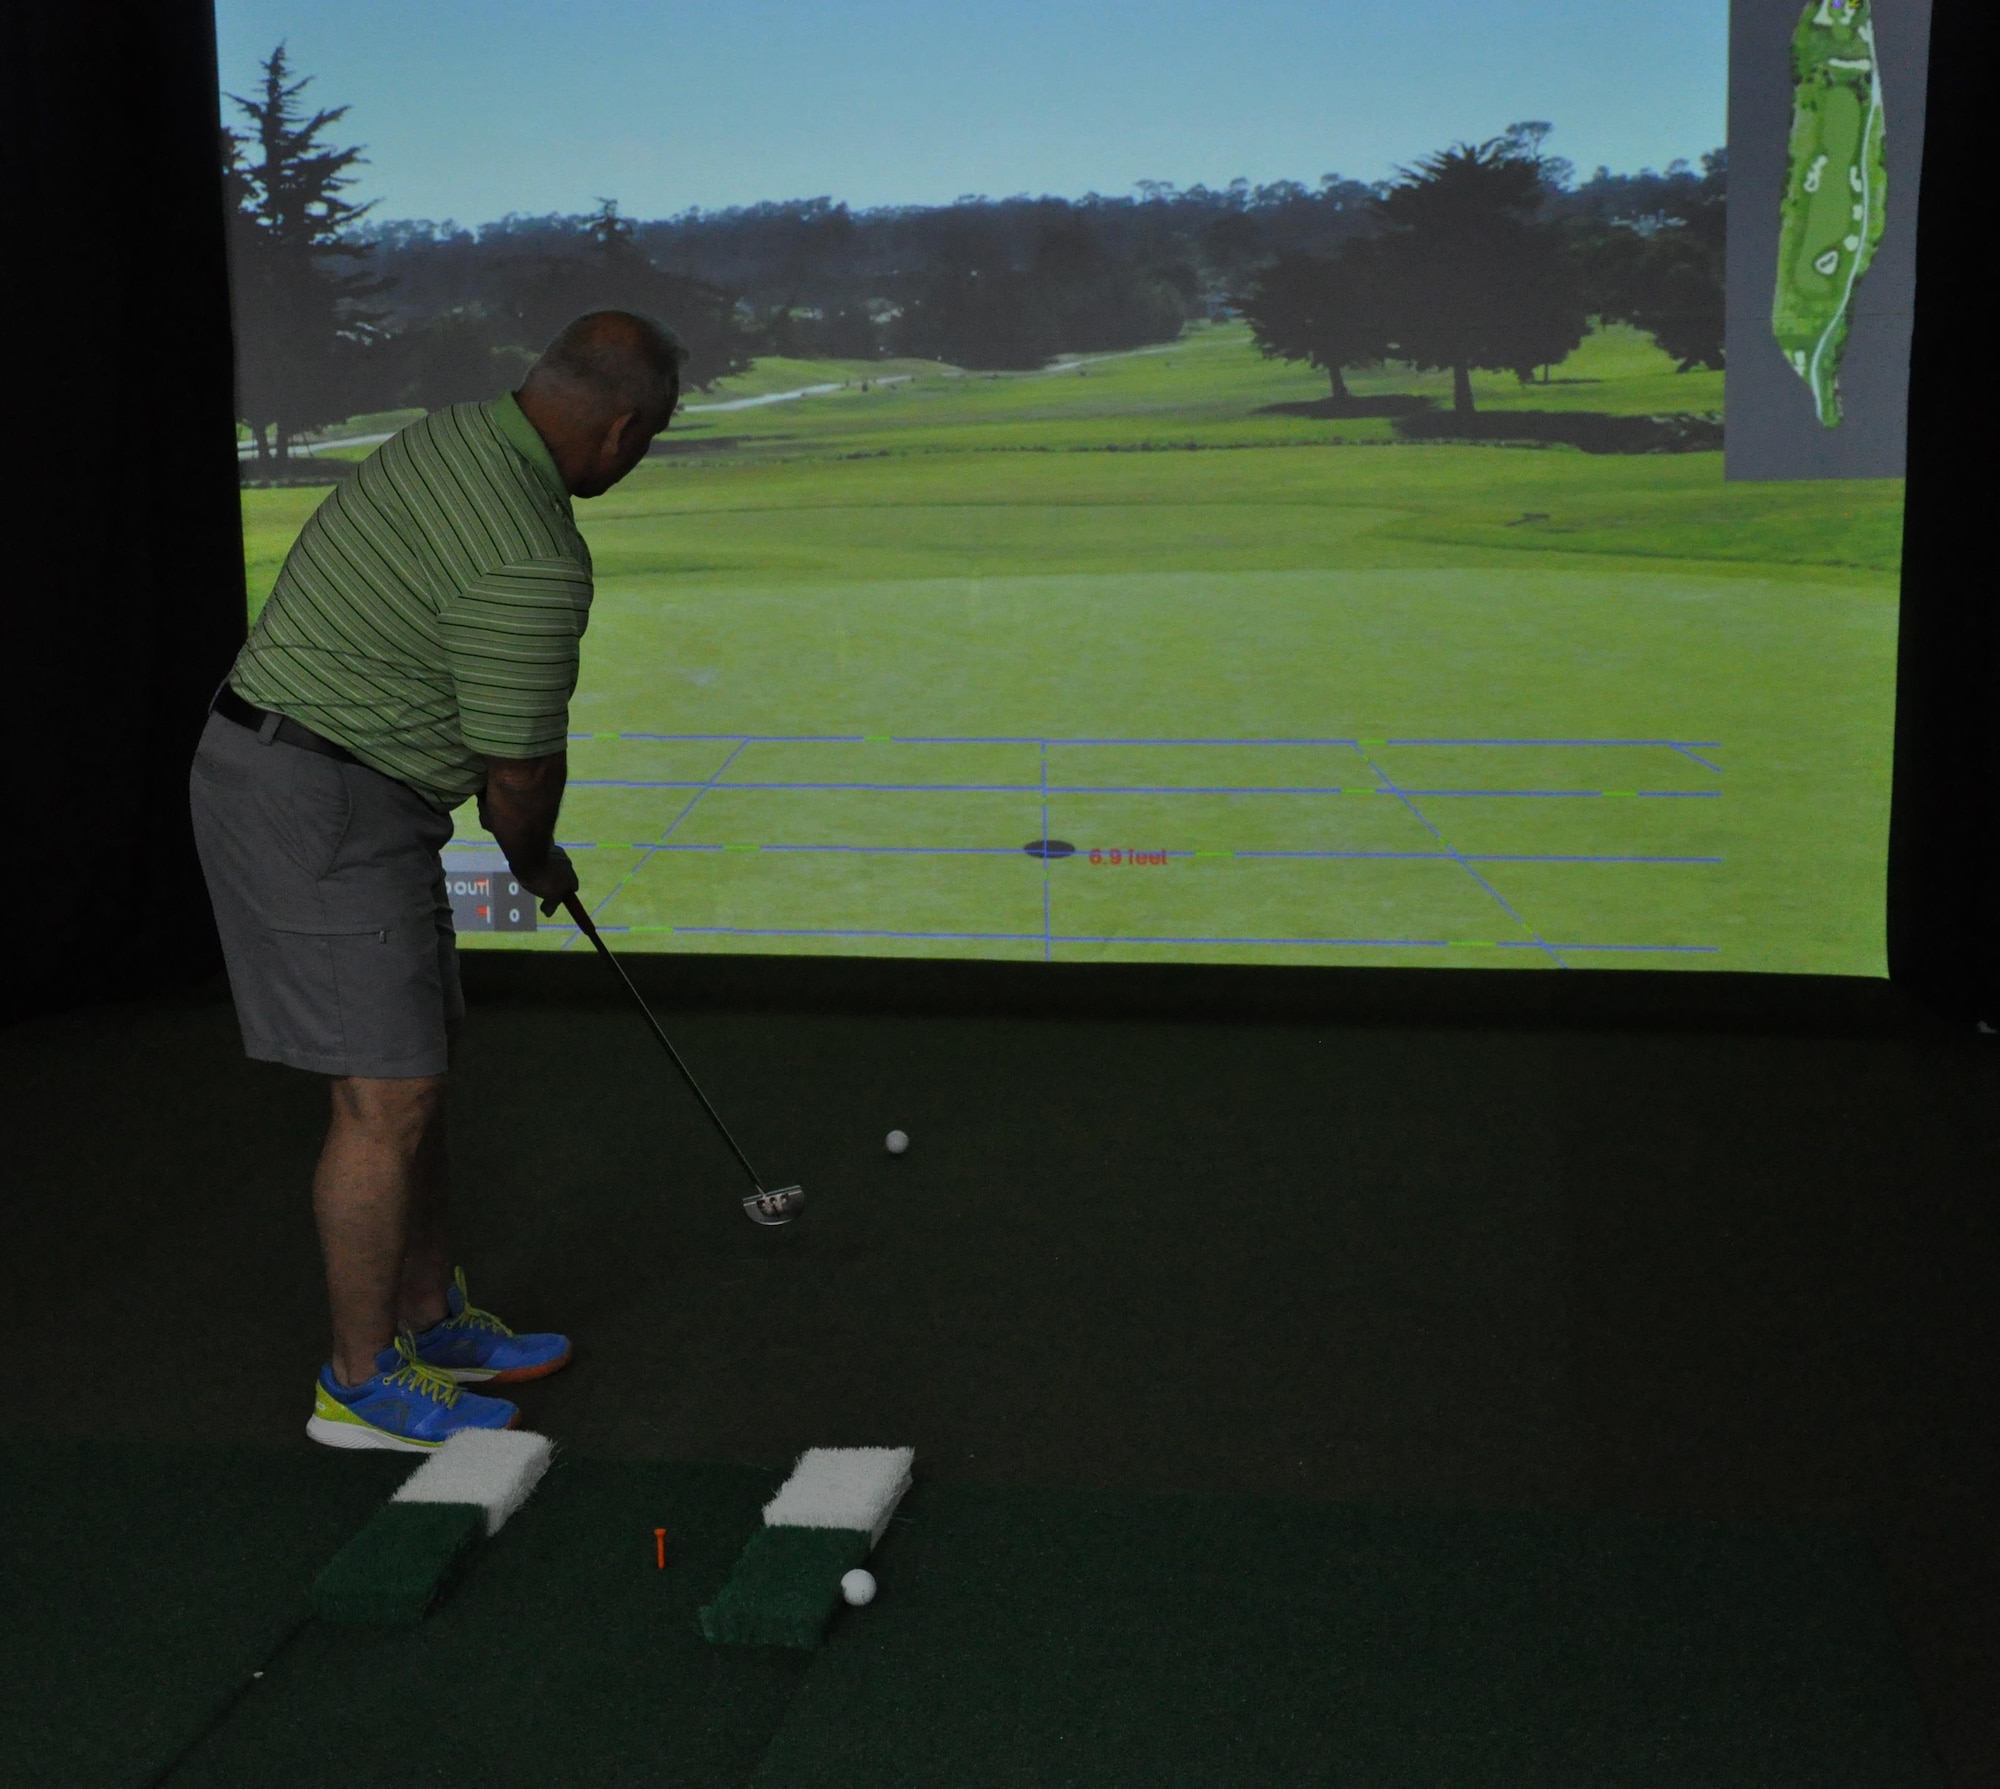 Retired Chief Master Sgt. Joey McCoy attempts to sink a put while playing a round of golf with the high definition golf simulator inside the Blatchford Preston Complex Community Activity Center at Al Udeid Air Base, Qatar, Jan. 16. McCoy said he enjoys playing golf and the simulator provides golfers with a realistic golfing experience. The simulator offers practice and competition modes, as well as one-on-one instruction from a virtual golf coach. (U.S. Air Force photo by Tech. Sgt. James Hodgman)